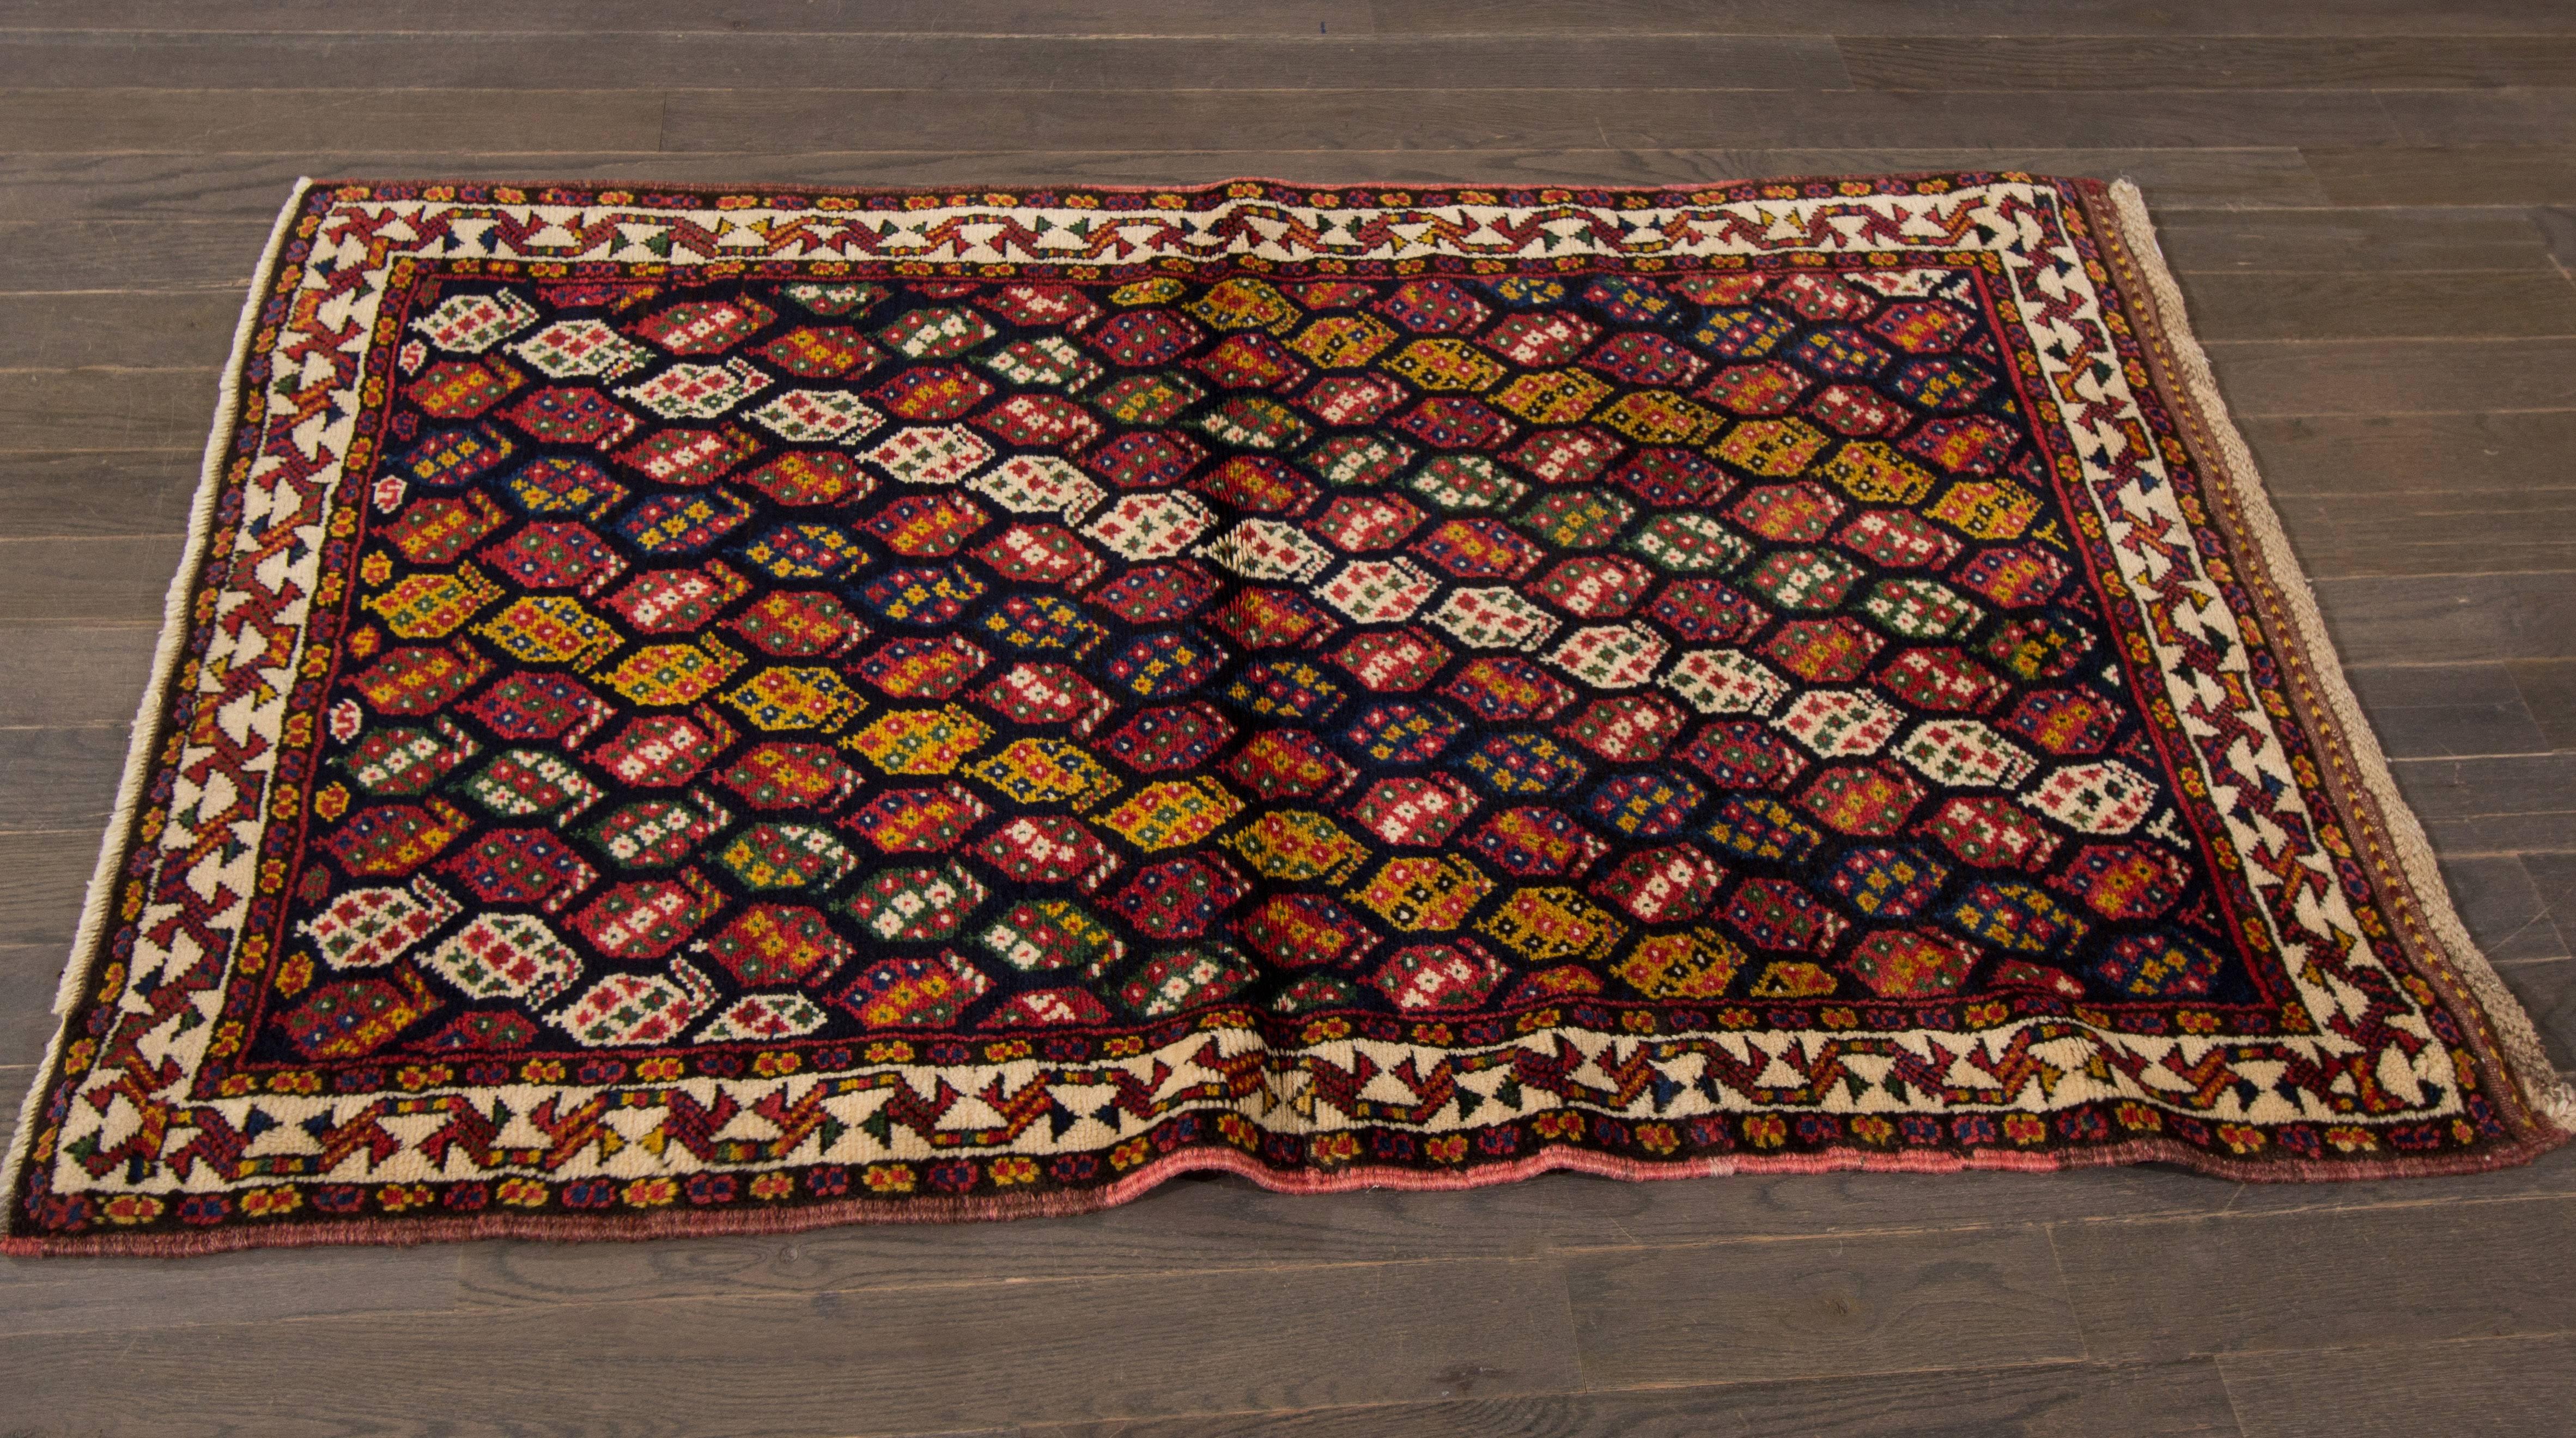 A hand-knotted Shiraz rug with a geometric pattern design on a black field. Accents of red, orange, green and ivory throughout the piece. This rug measures 3' x 4'.9.